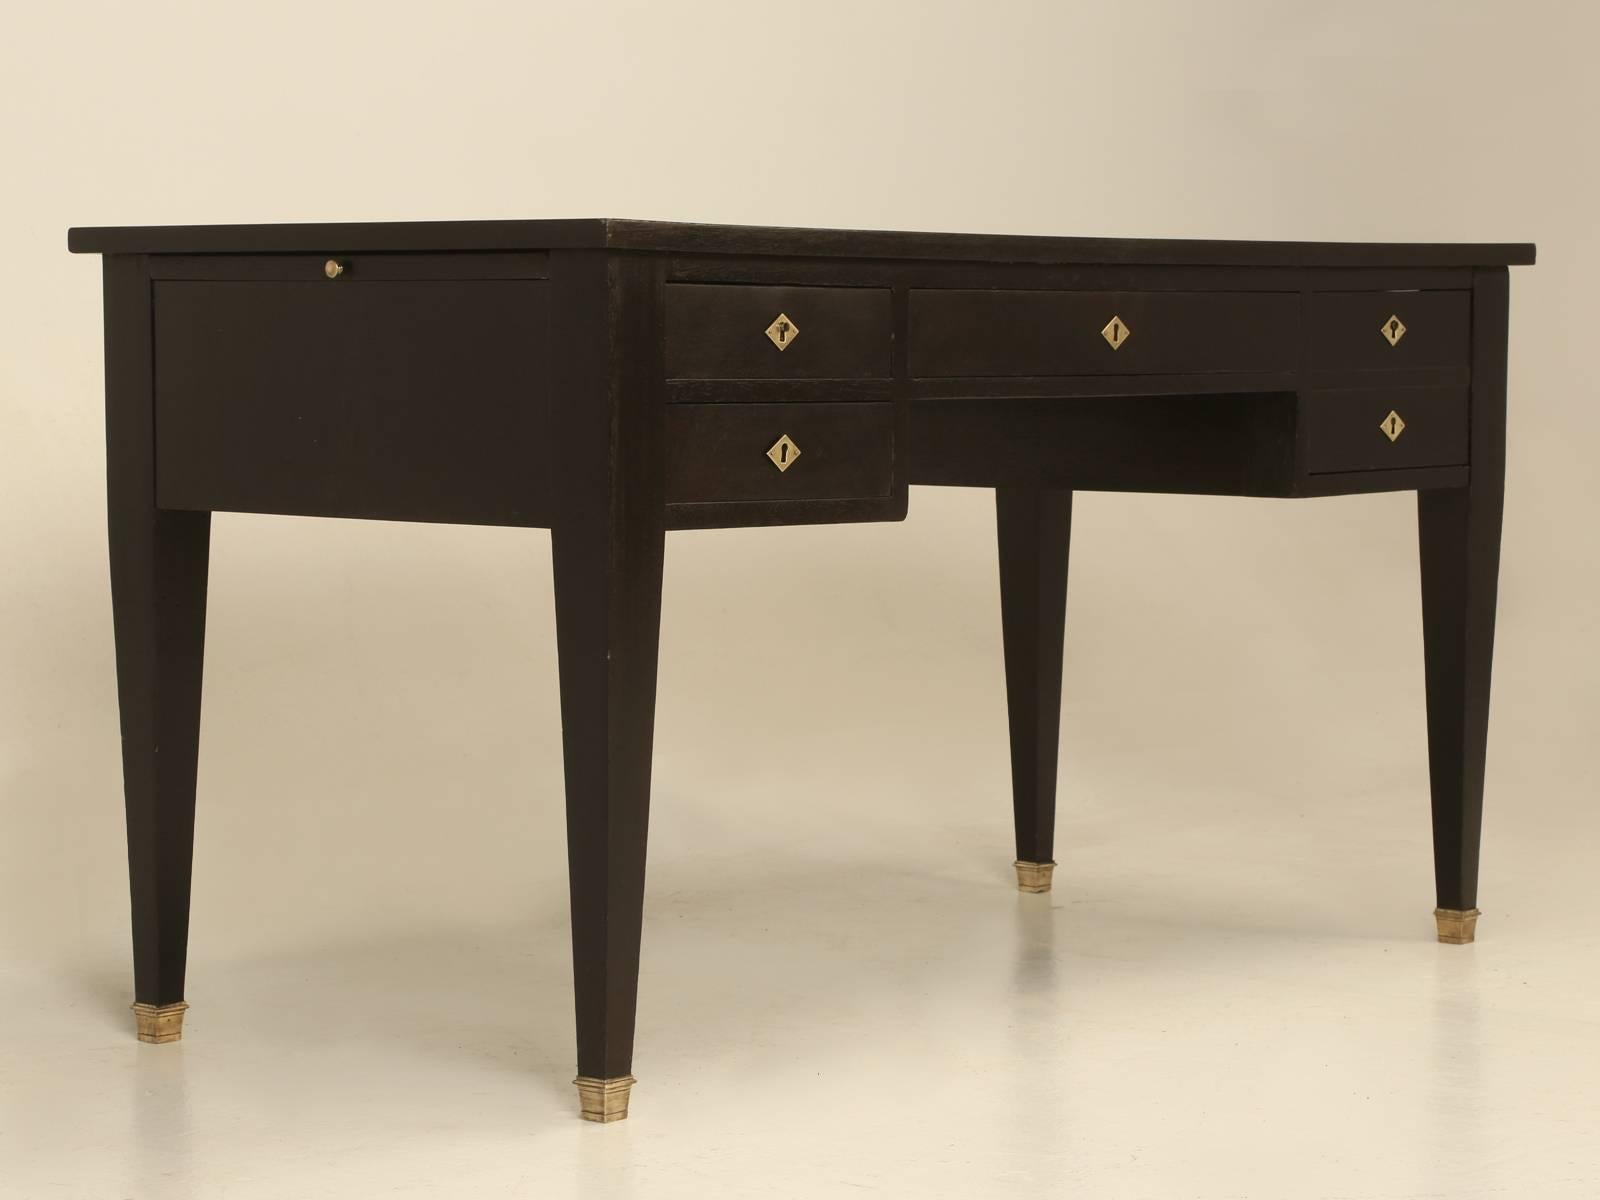 Antique French Directoire Style Desk in an Ebonized Finish 5